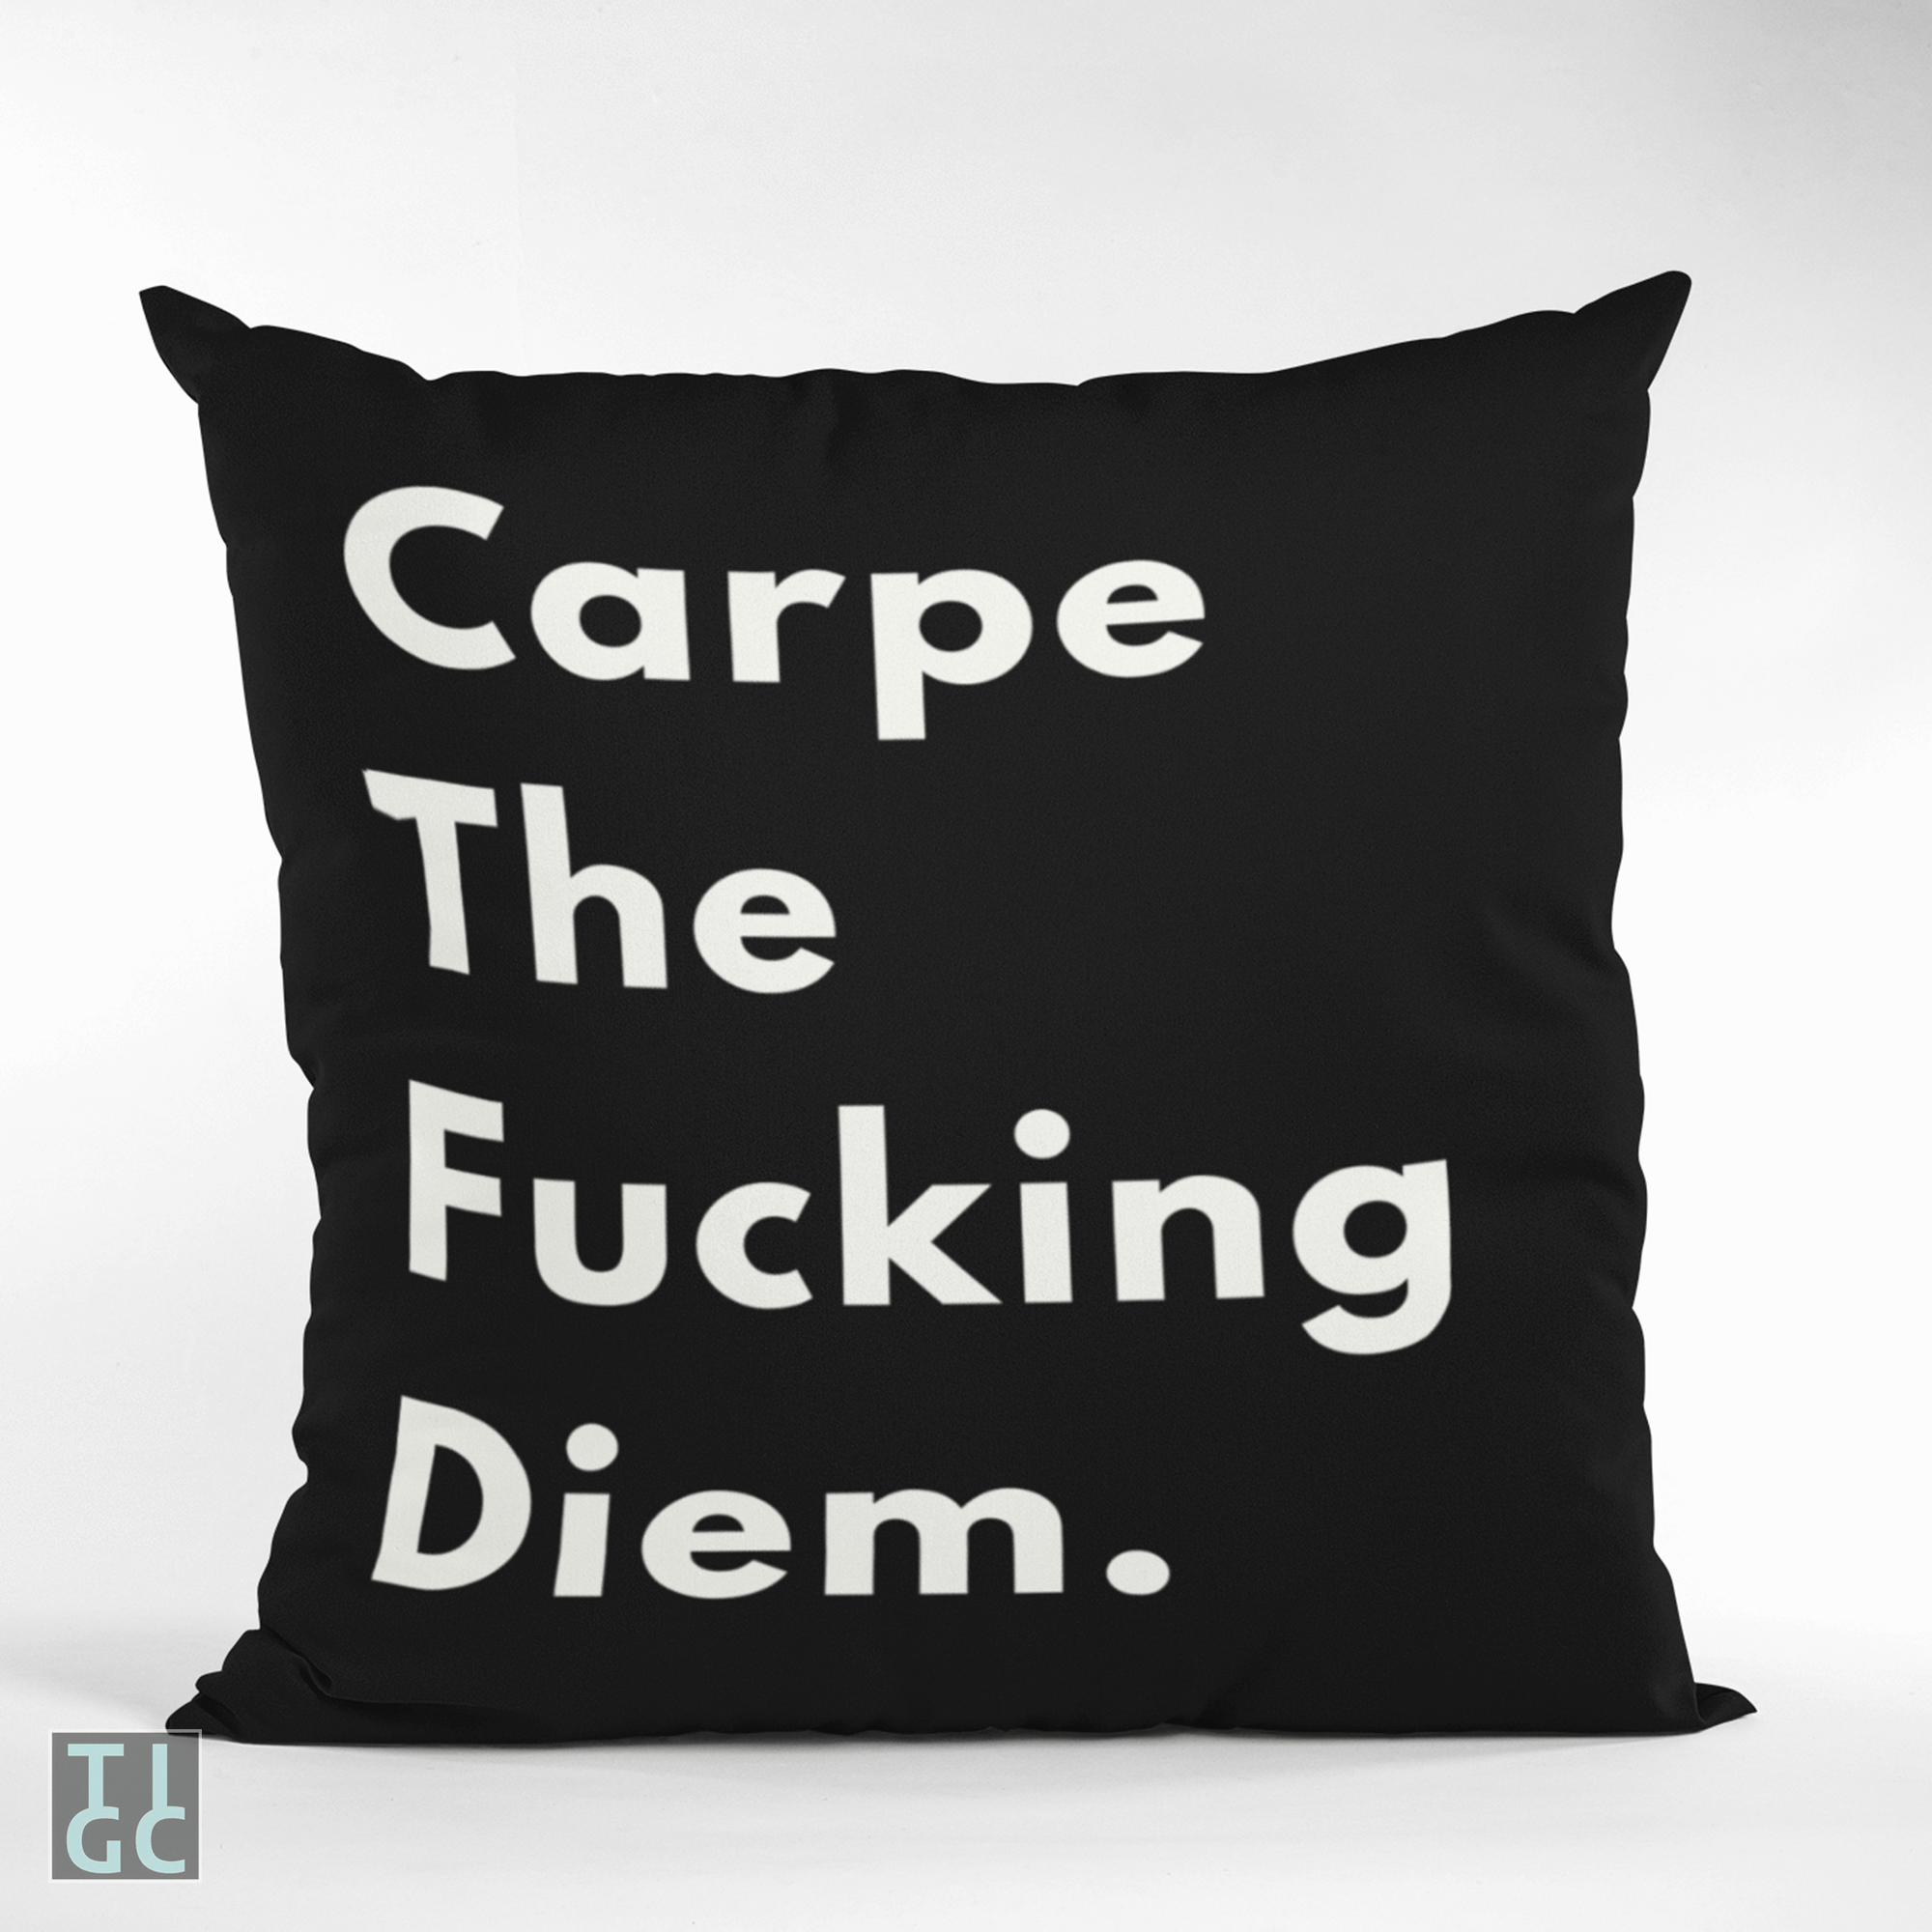 TIGC The Inappropriate Gift Co Carpe the Fucking Diem Cushion Cover